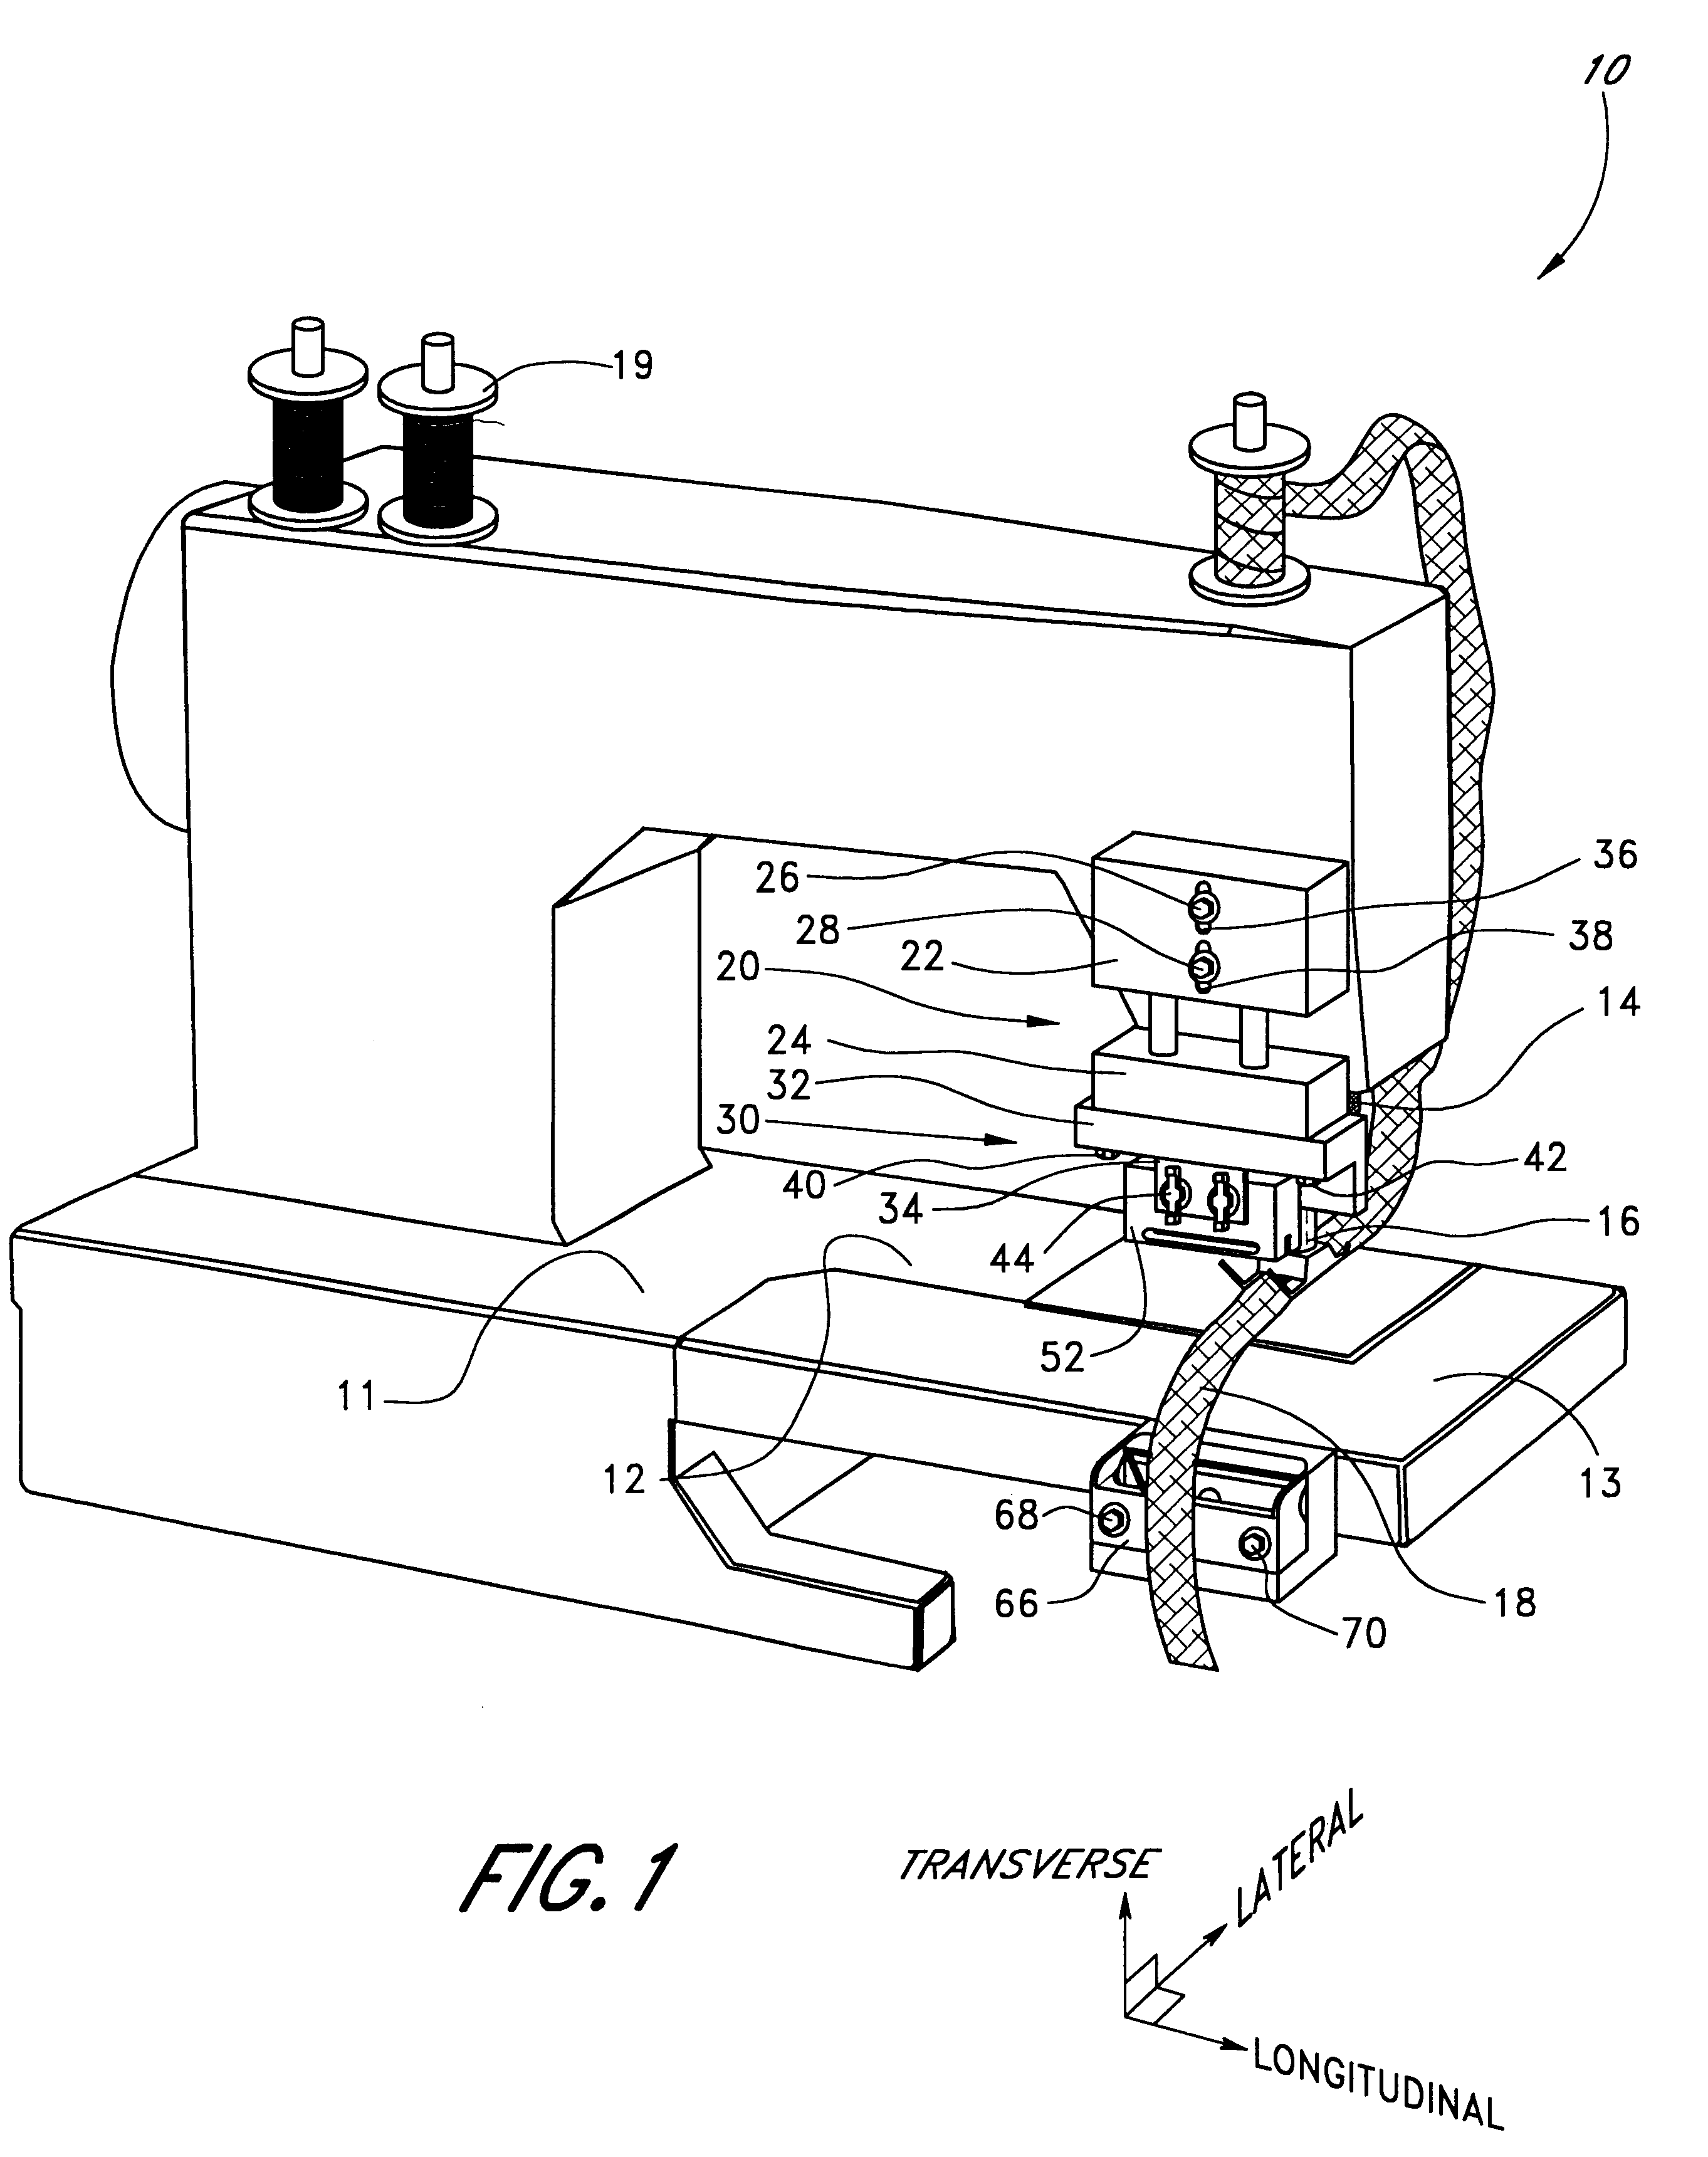 Cutting device for elongated materials